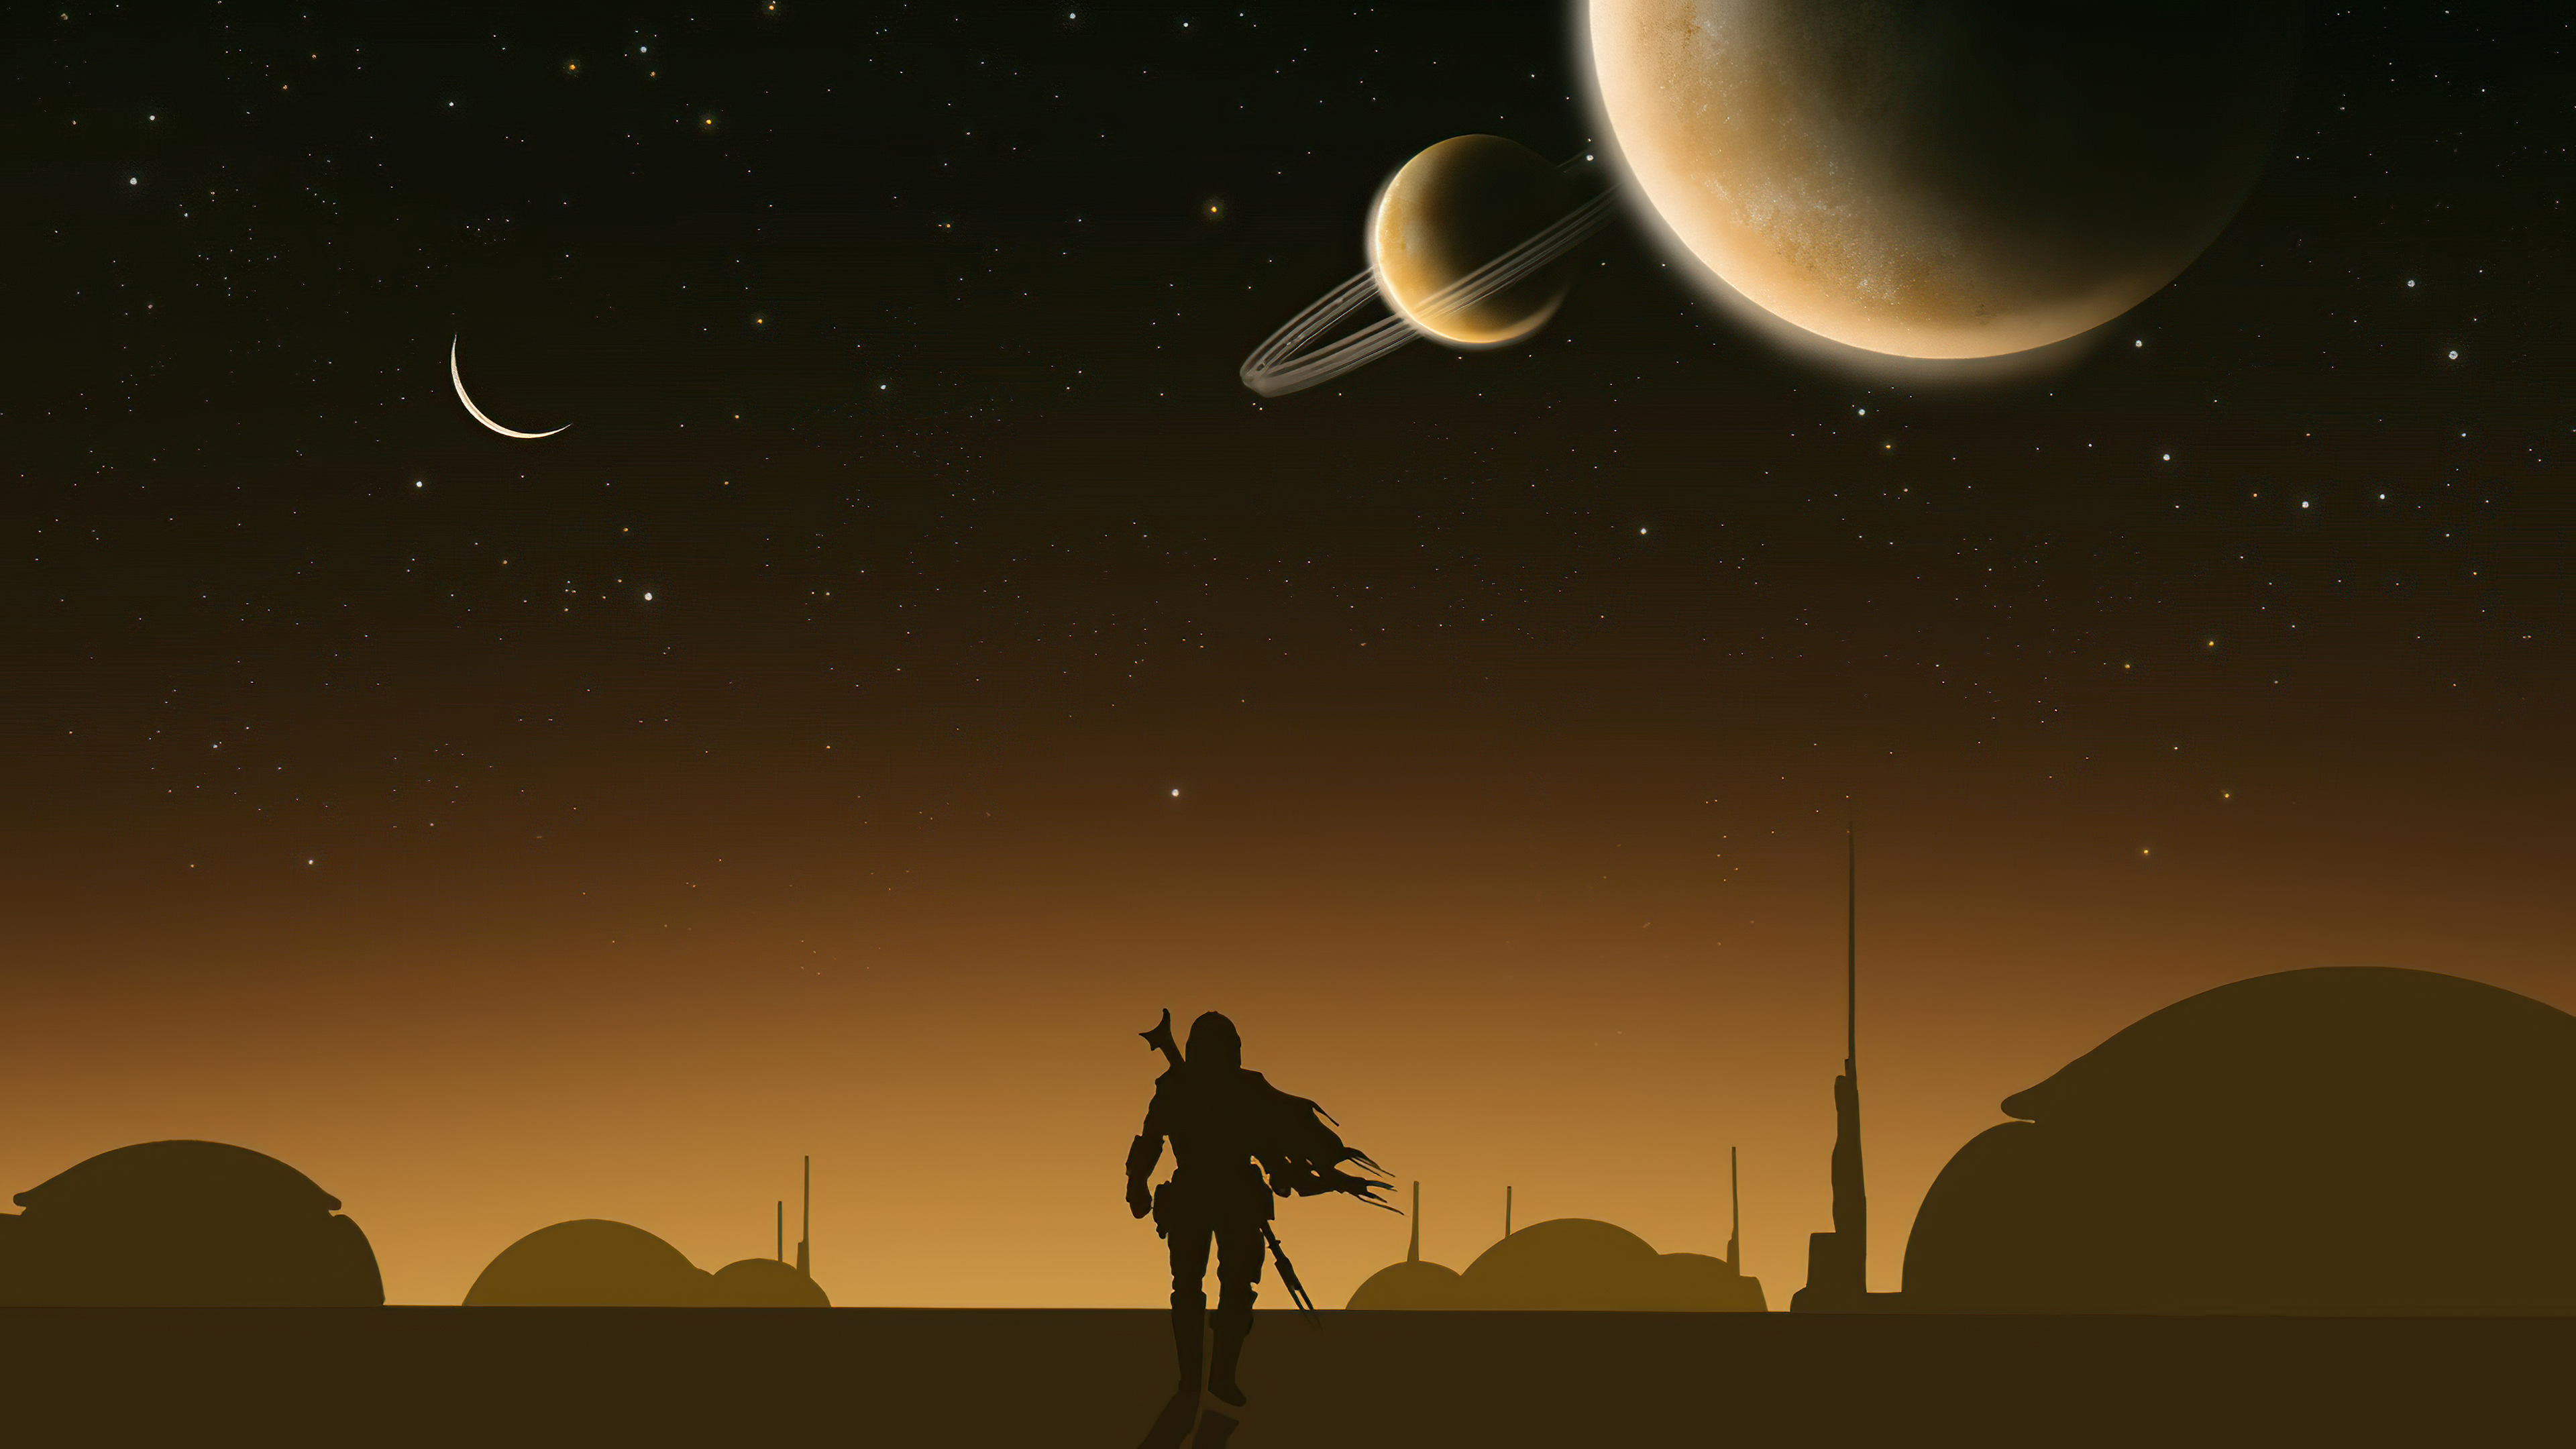 Planets star wars wallpapers